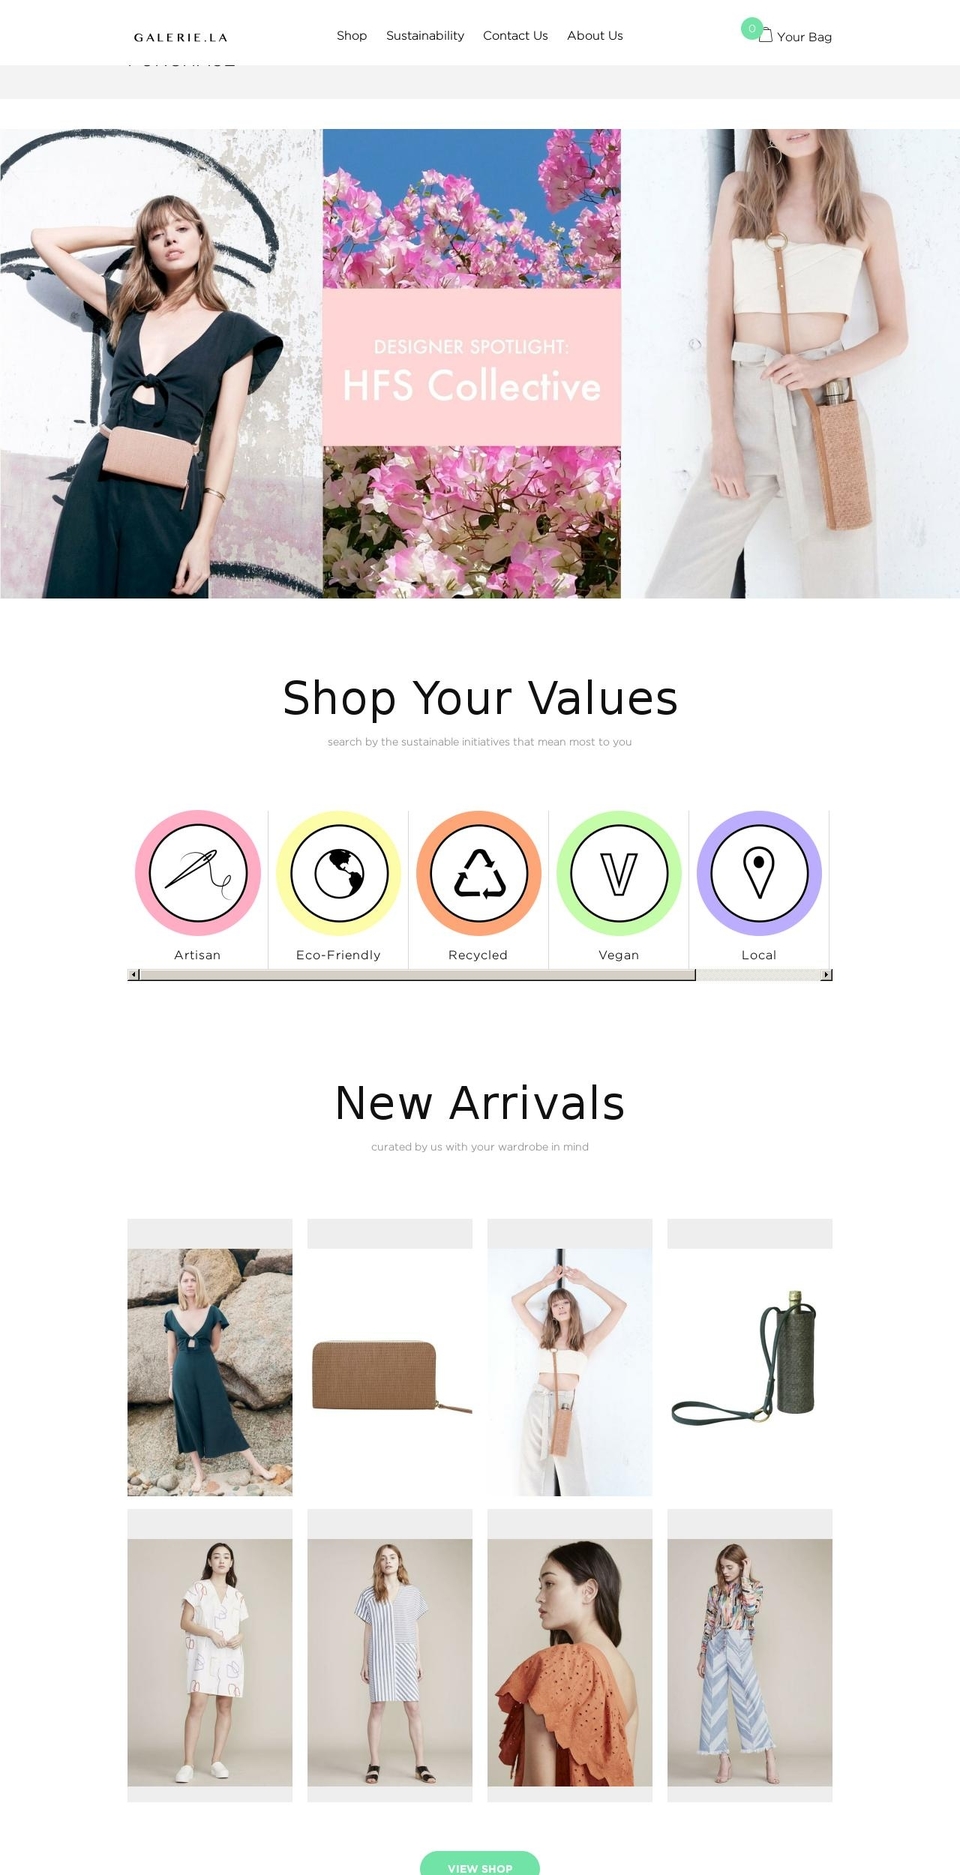 maxus-home6 Shopify theme site example galerie.la